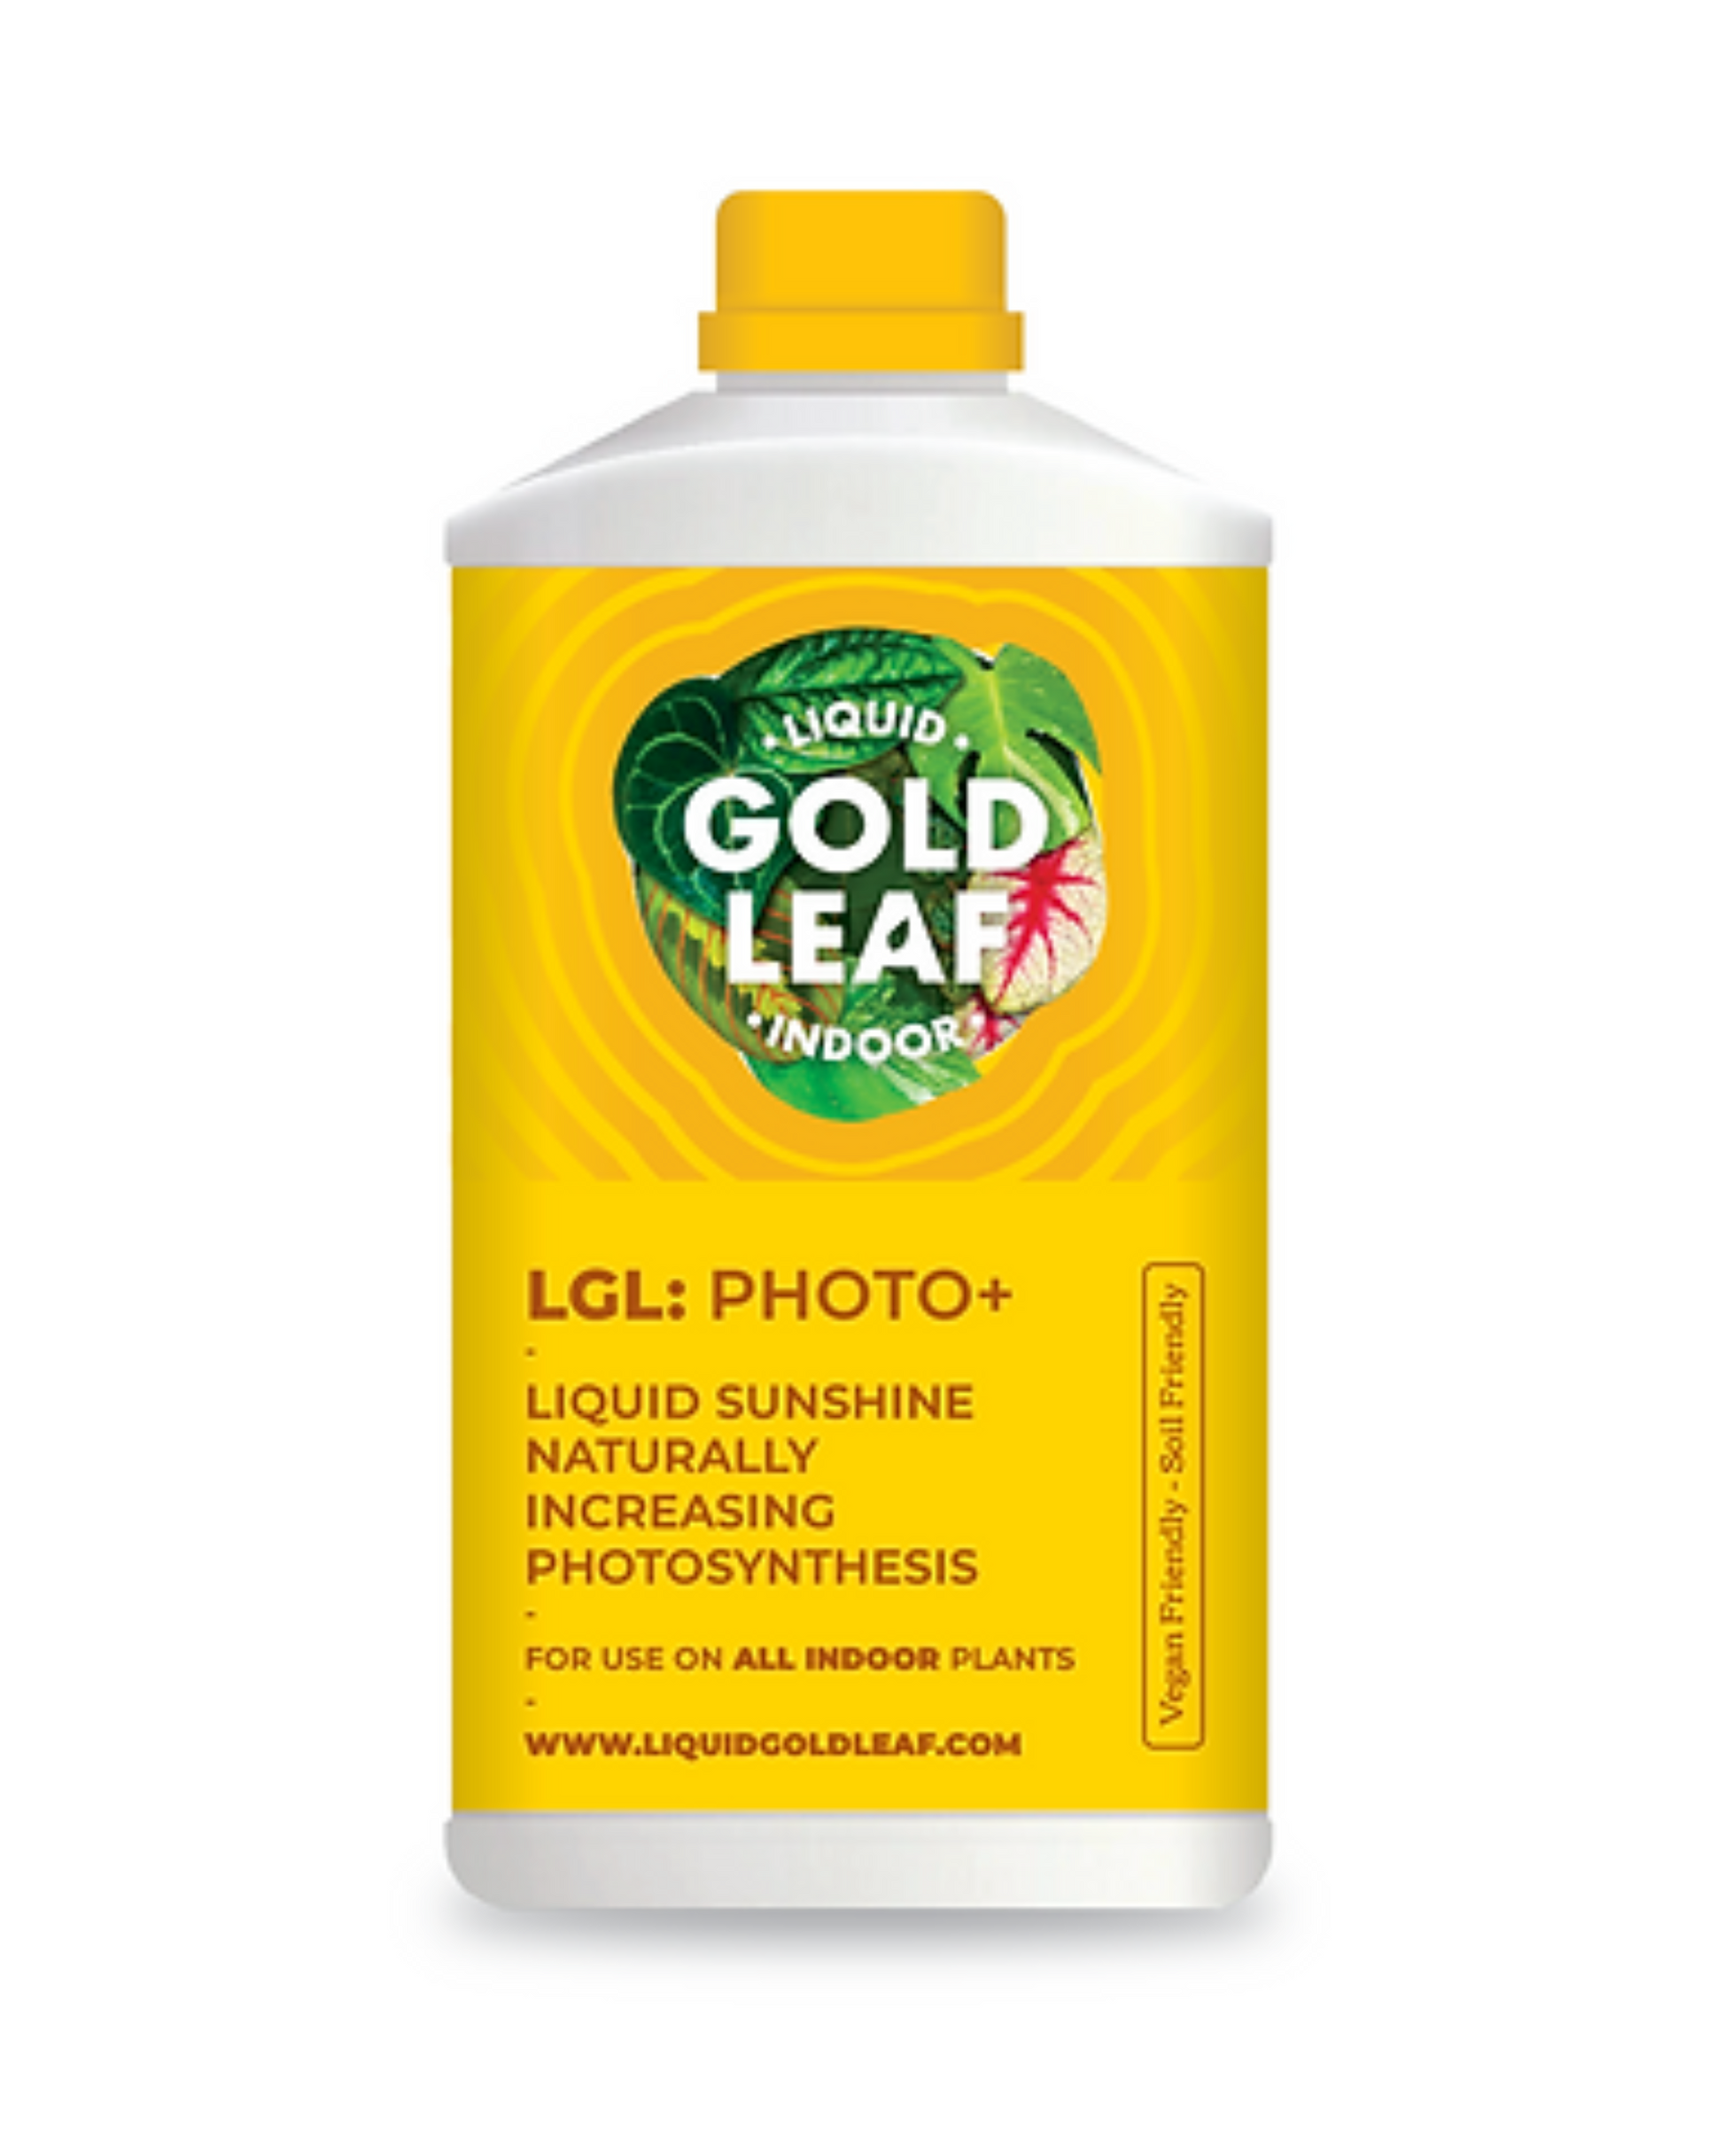 Liquid Gold Leaf Indoor Photo+ (250ml) – The Every Space